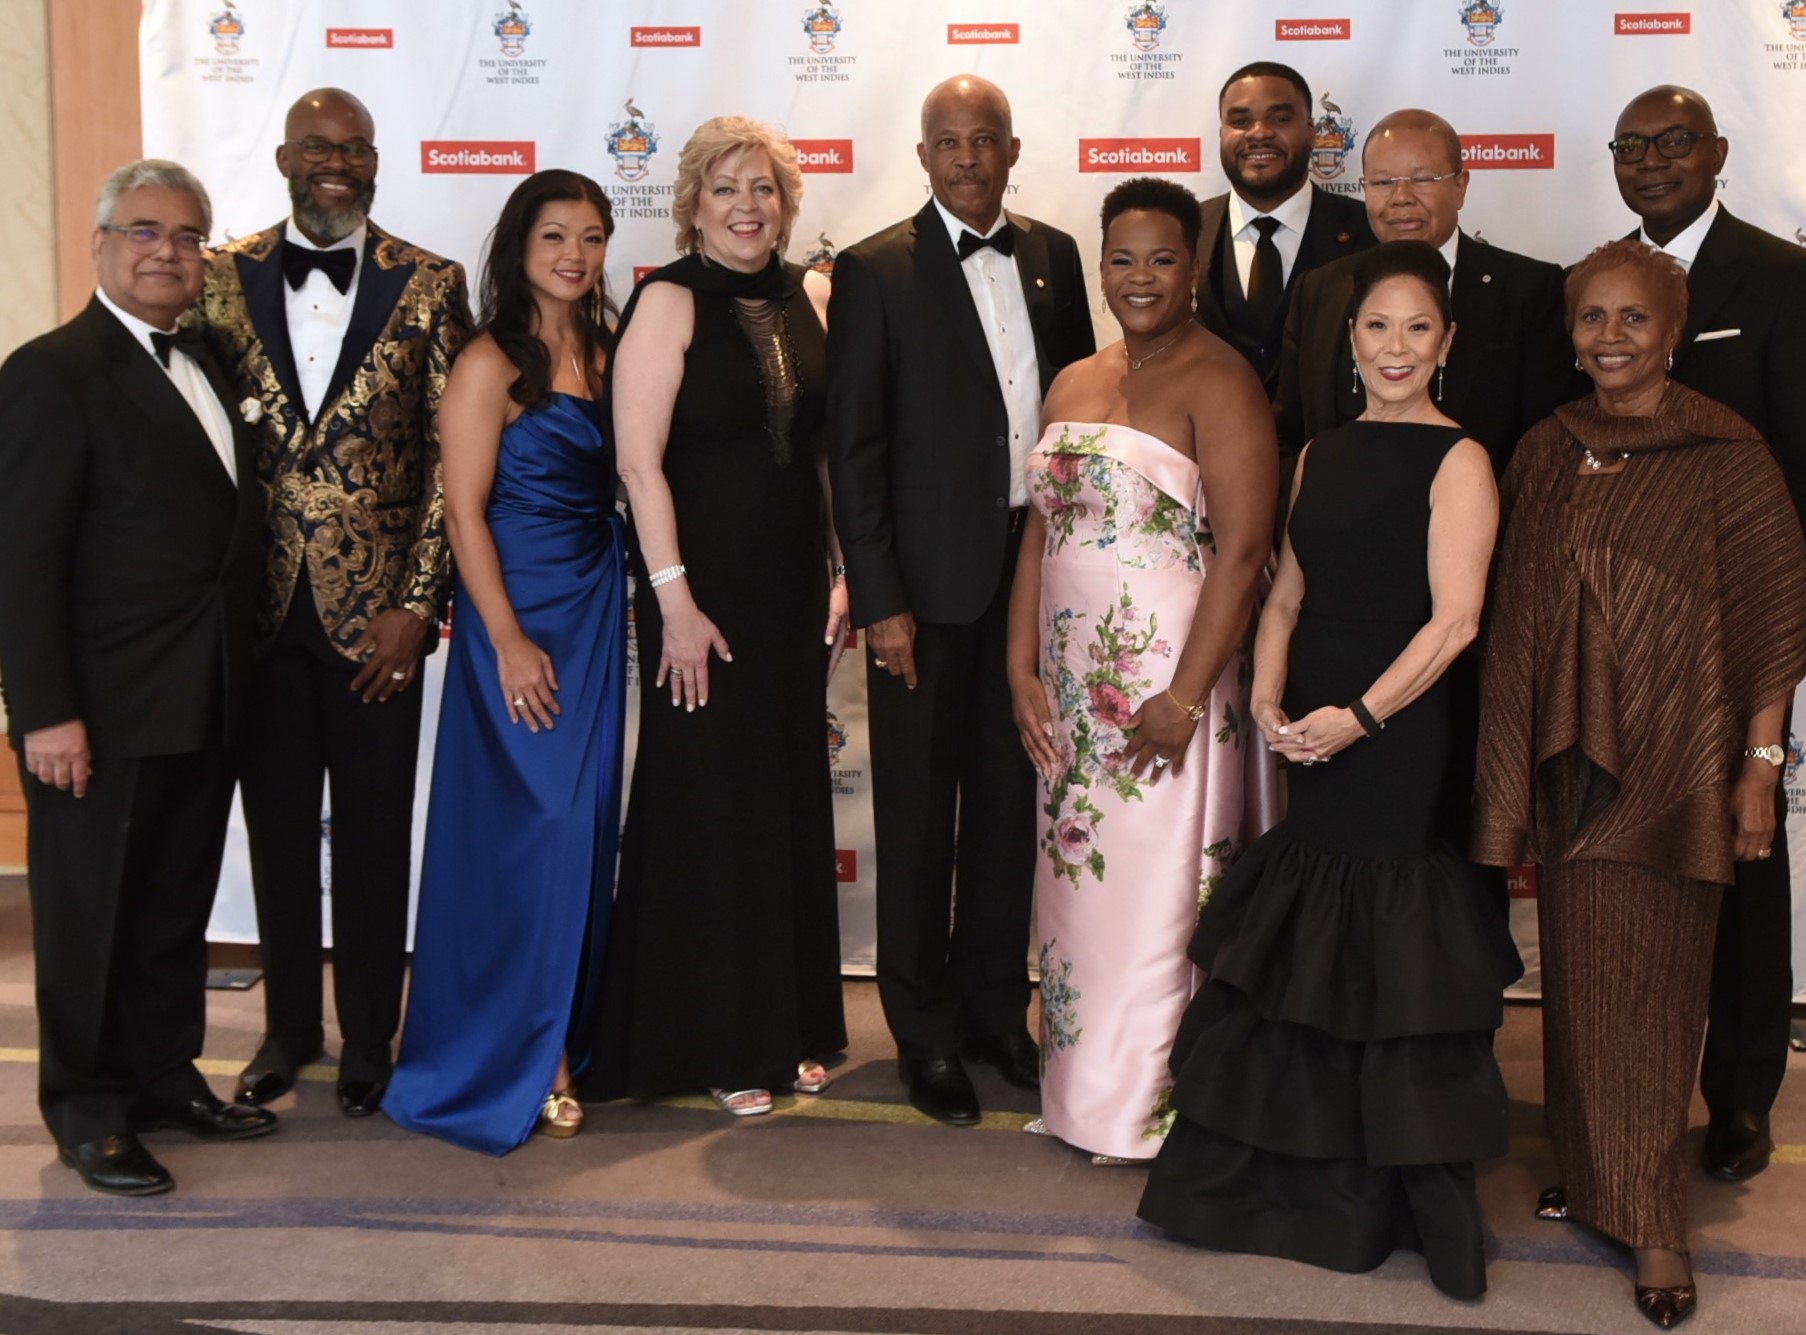 Over $400,000 Canadian raised for UWI students at  annual Toronto benefit event